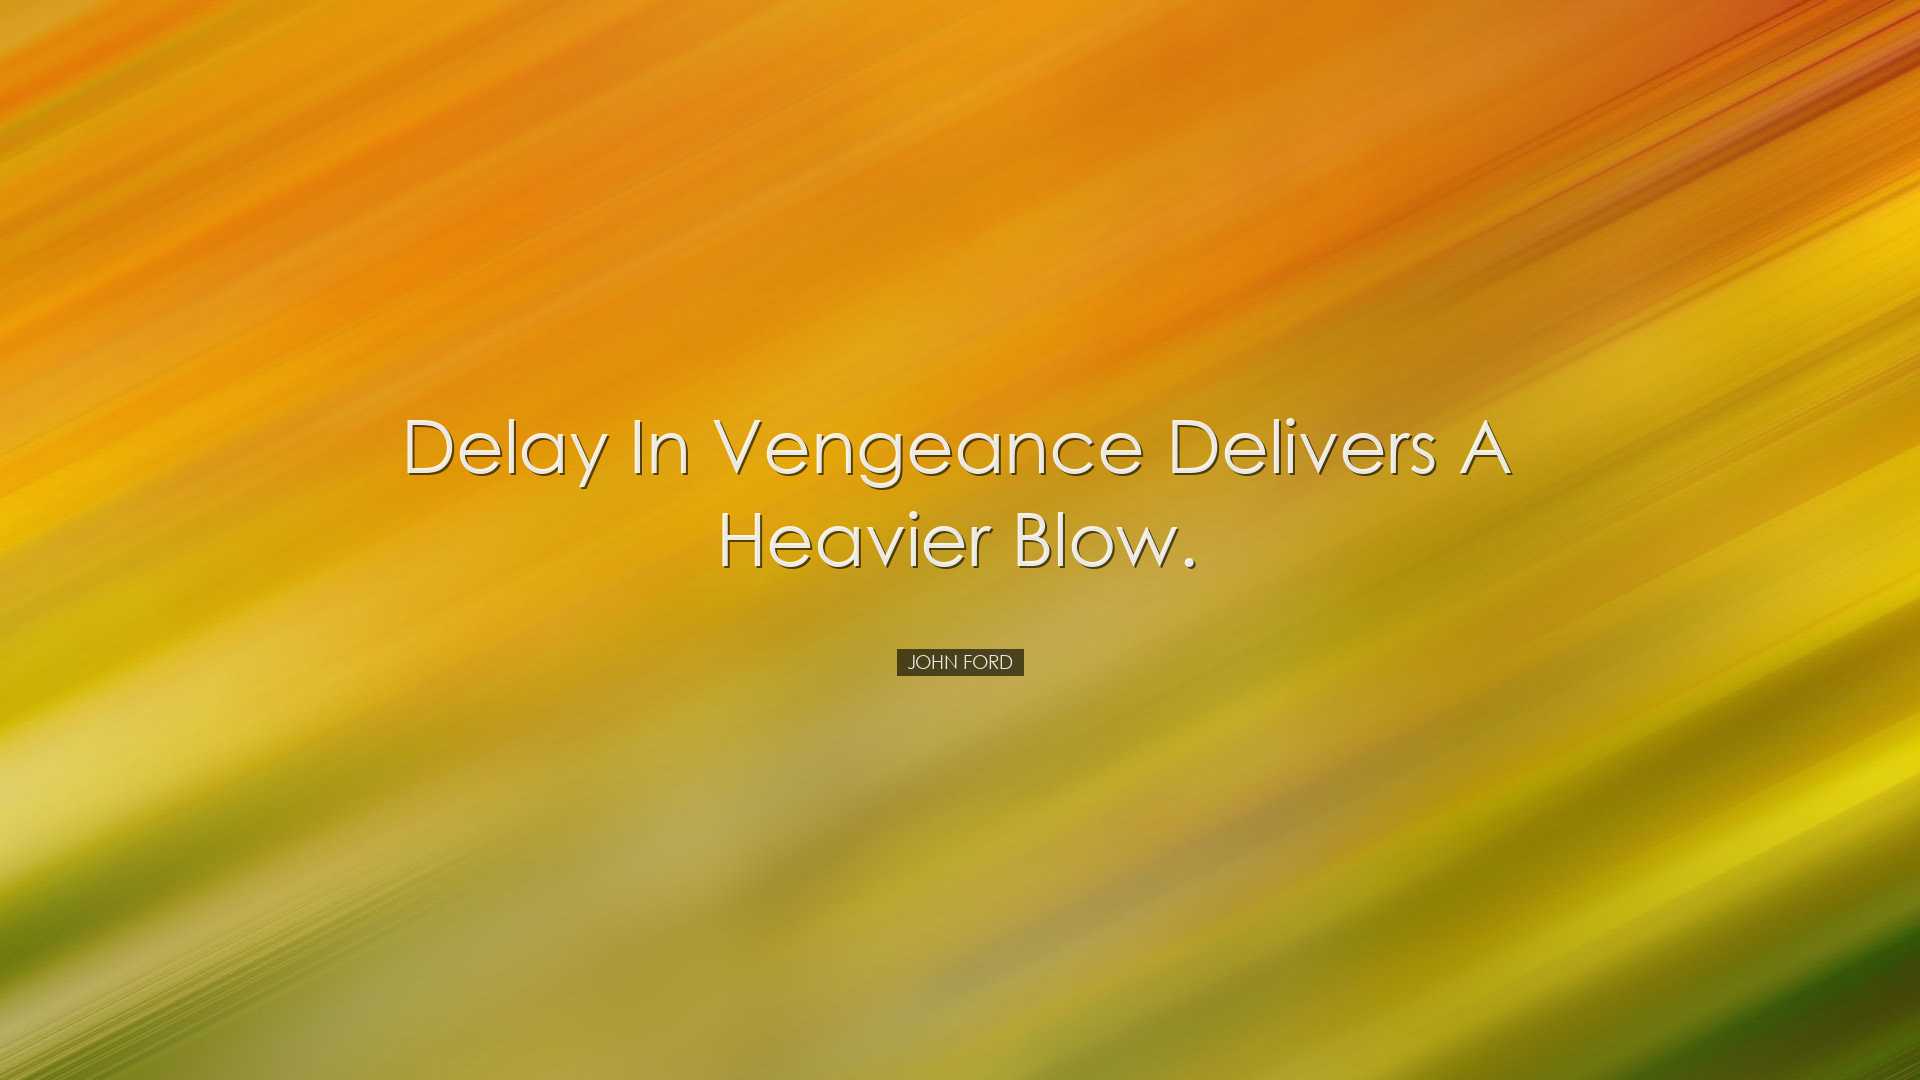 Delay in vengeance delivers a heavier blow. - John Ford